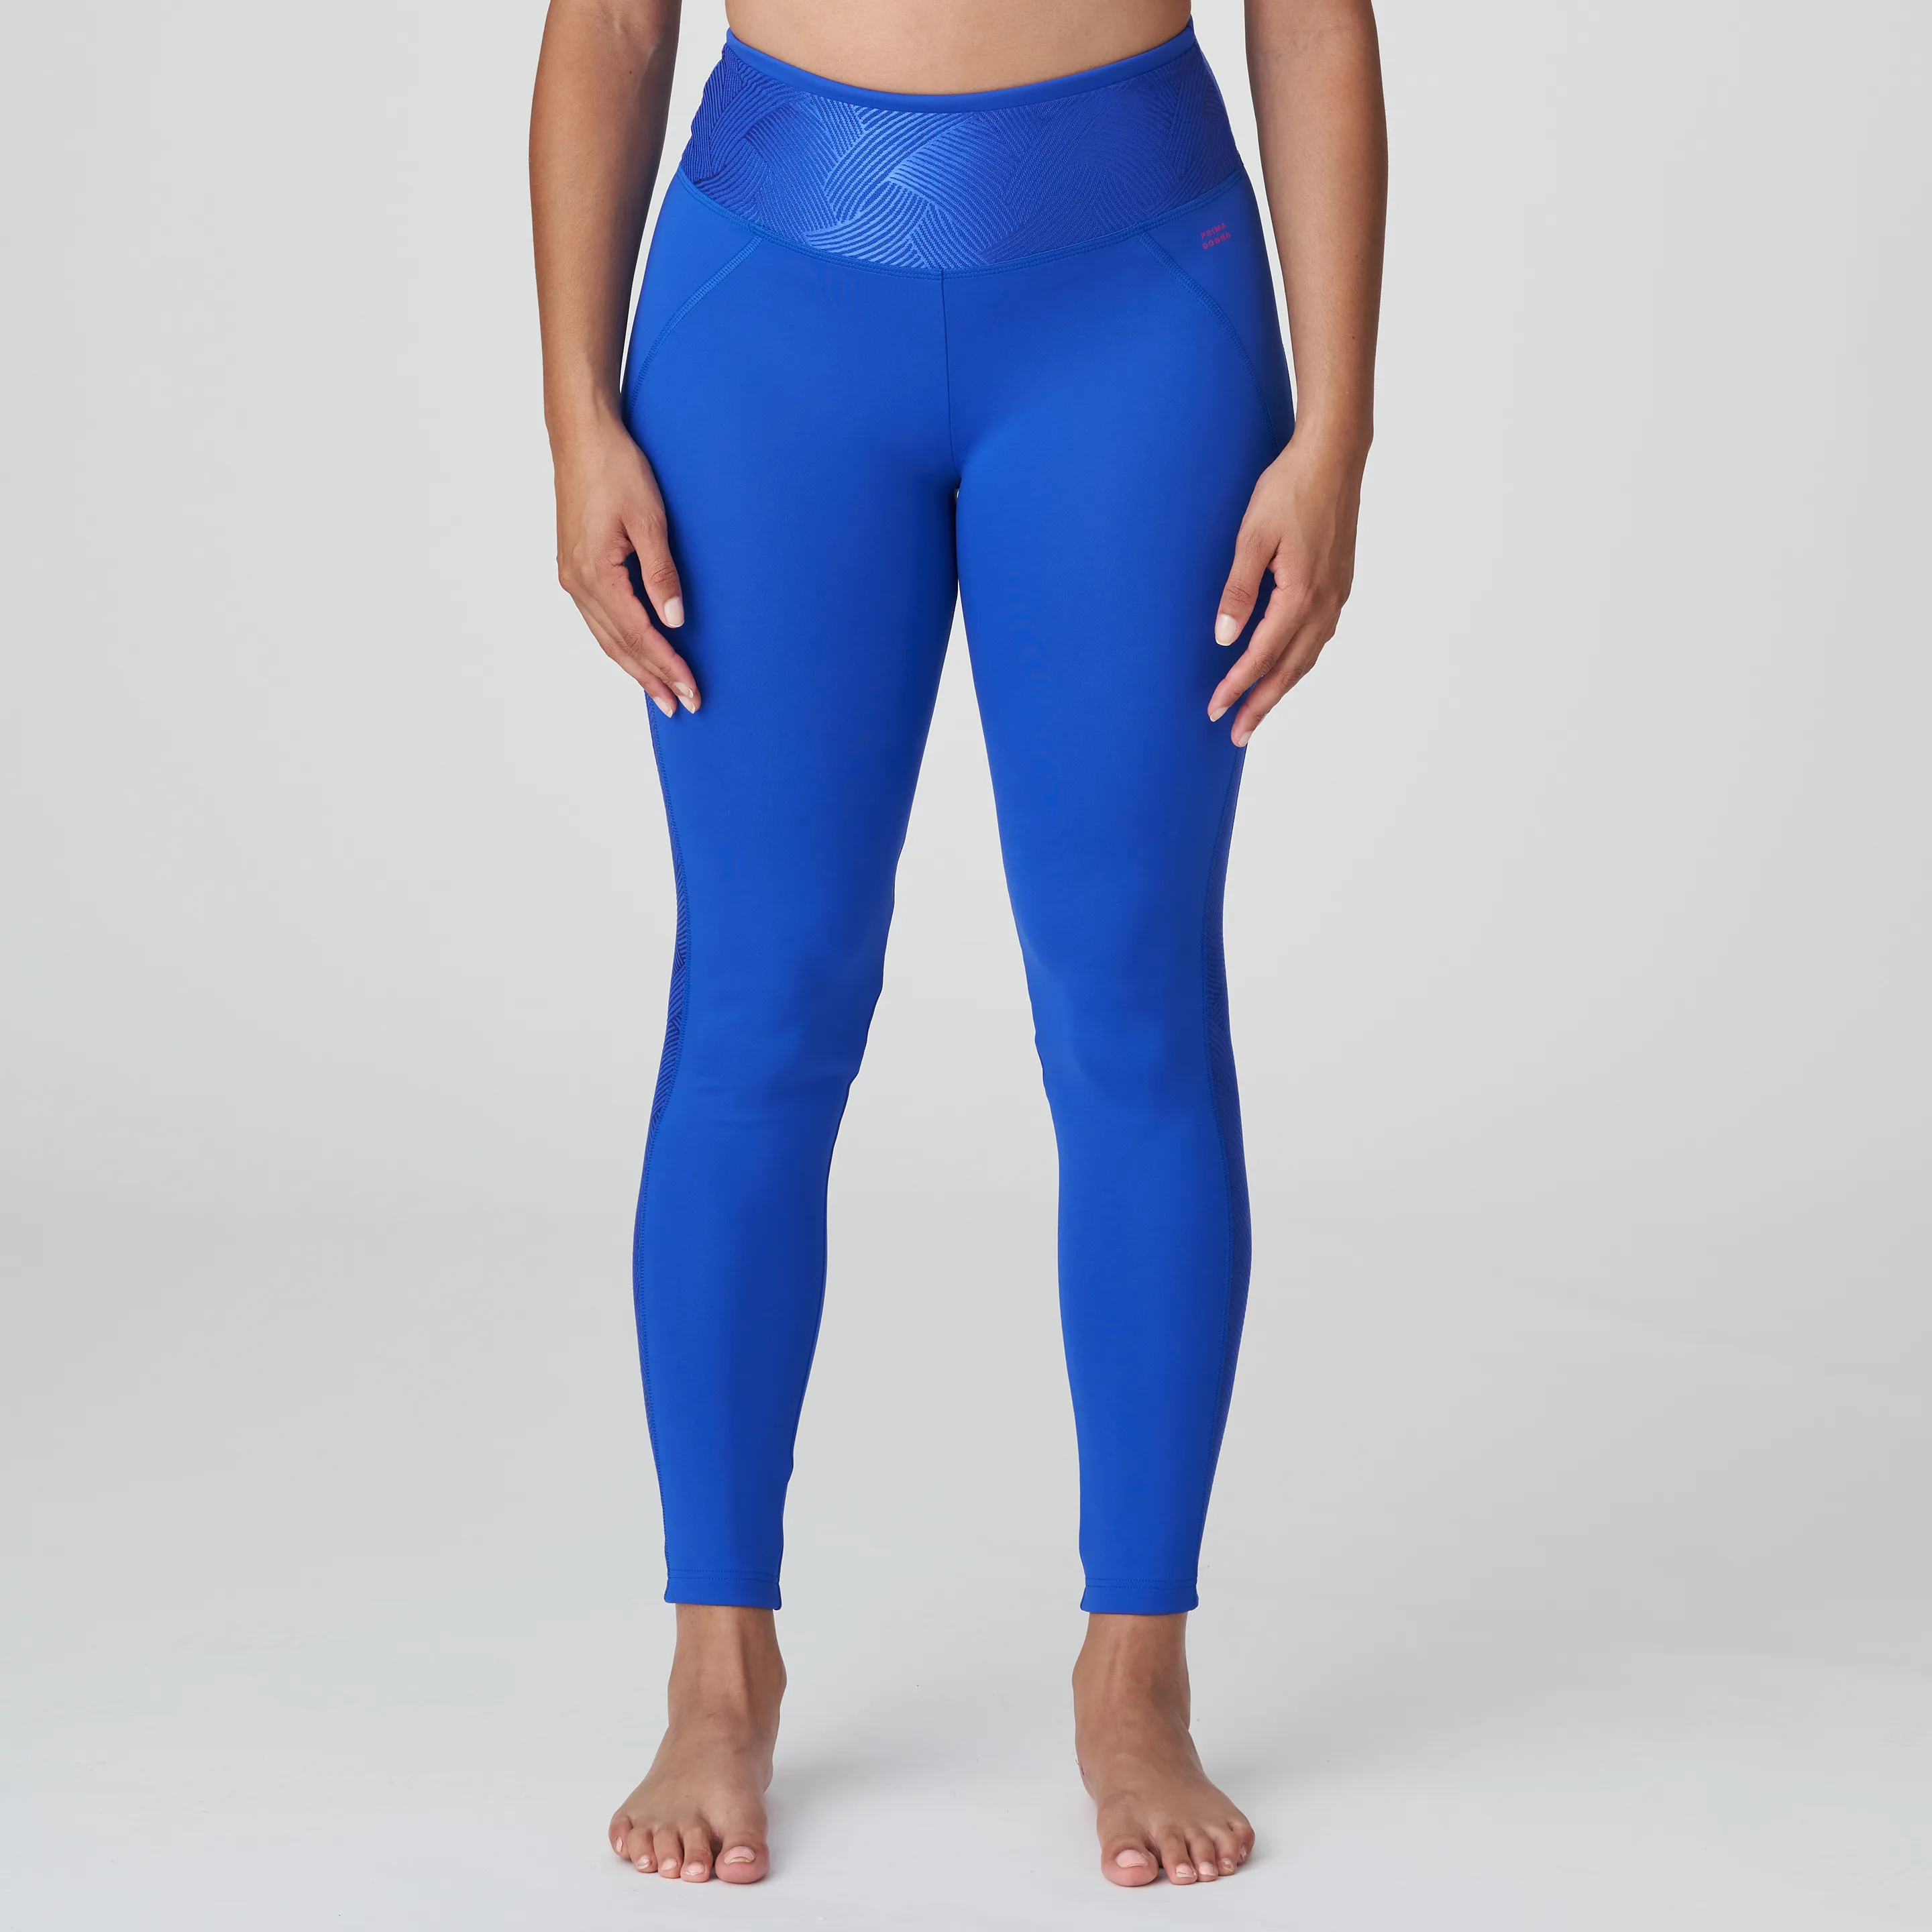 PrimaDonna Sport THE GAME Electric Blue sports pants